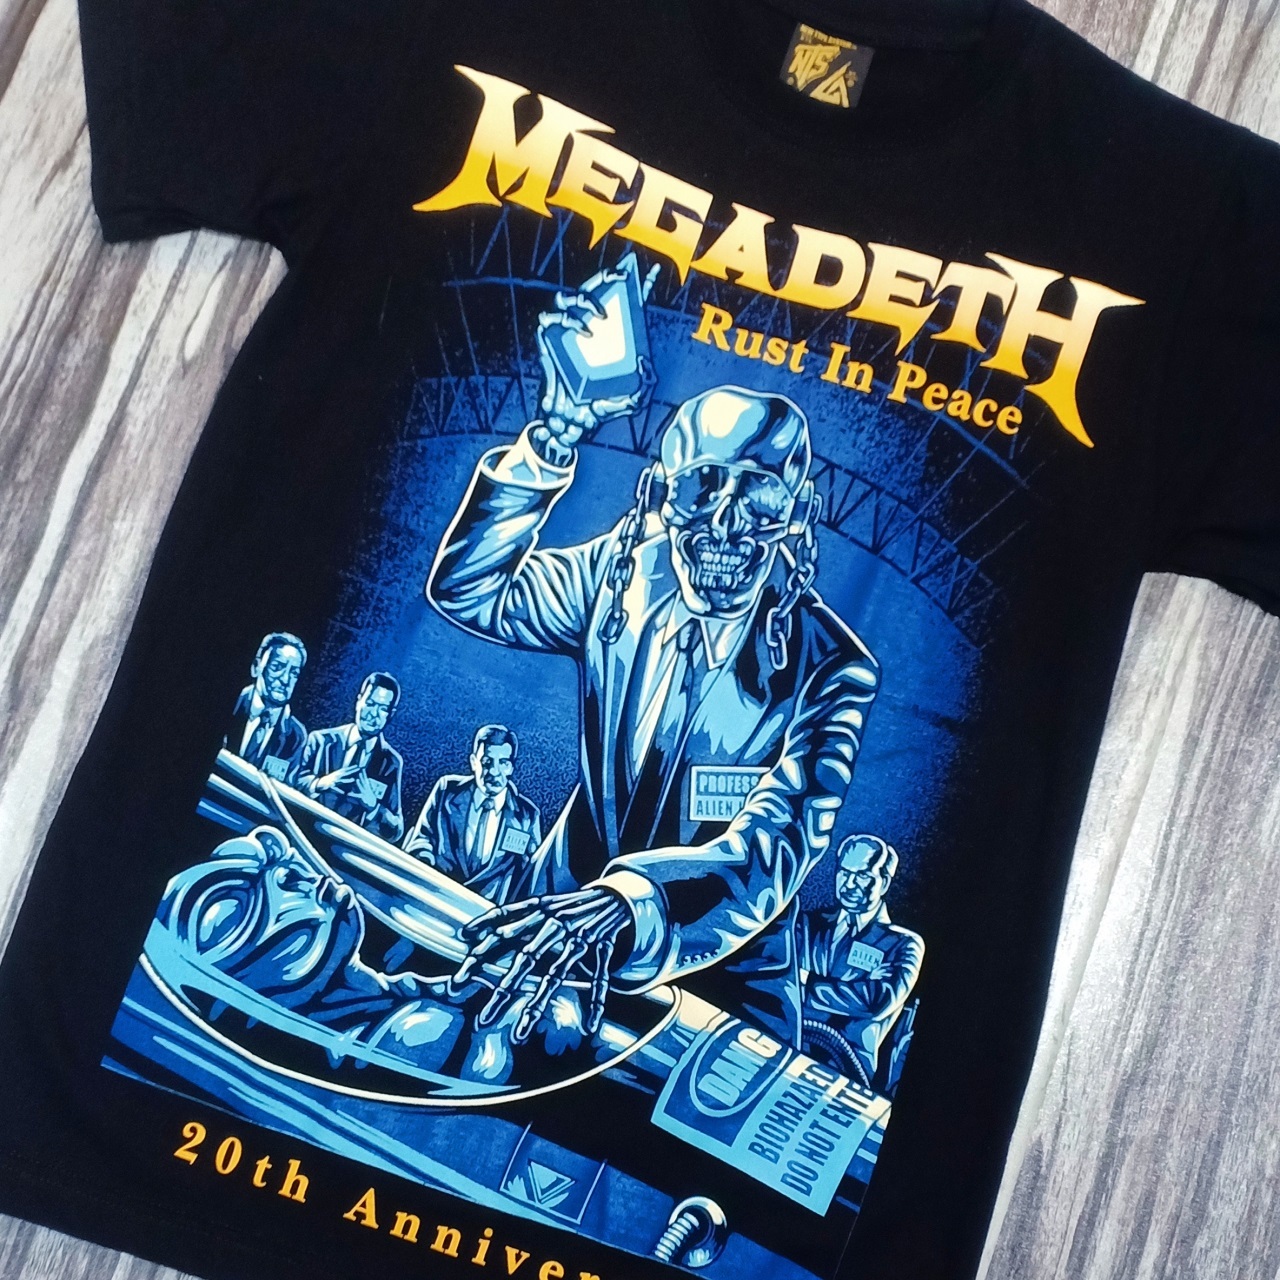 13R192 MEGADETH HEAVY METAL ROCK BAND RUST IN PEACE ALBUM COVER COLLECTION  NTS ORIGINAL NEW TYPE SYSTEM COTTON T-SHIRT – PREMIUM GRADE BLACK TIMBER  NEW TYPE SYSTEM MOAI SPEED HIGH QUALITY SILK